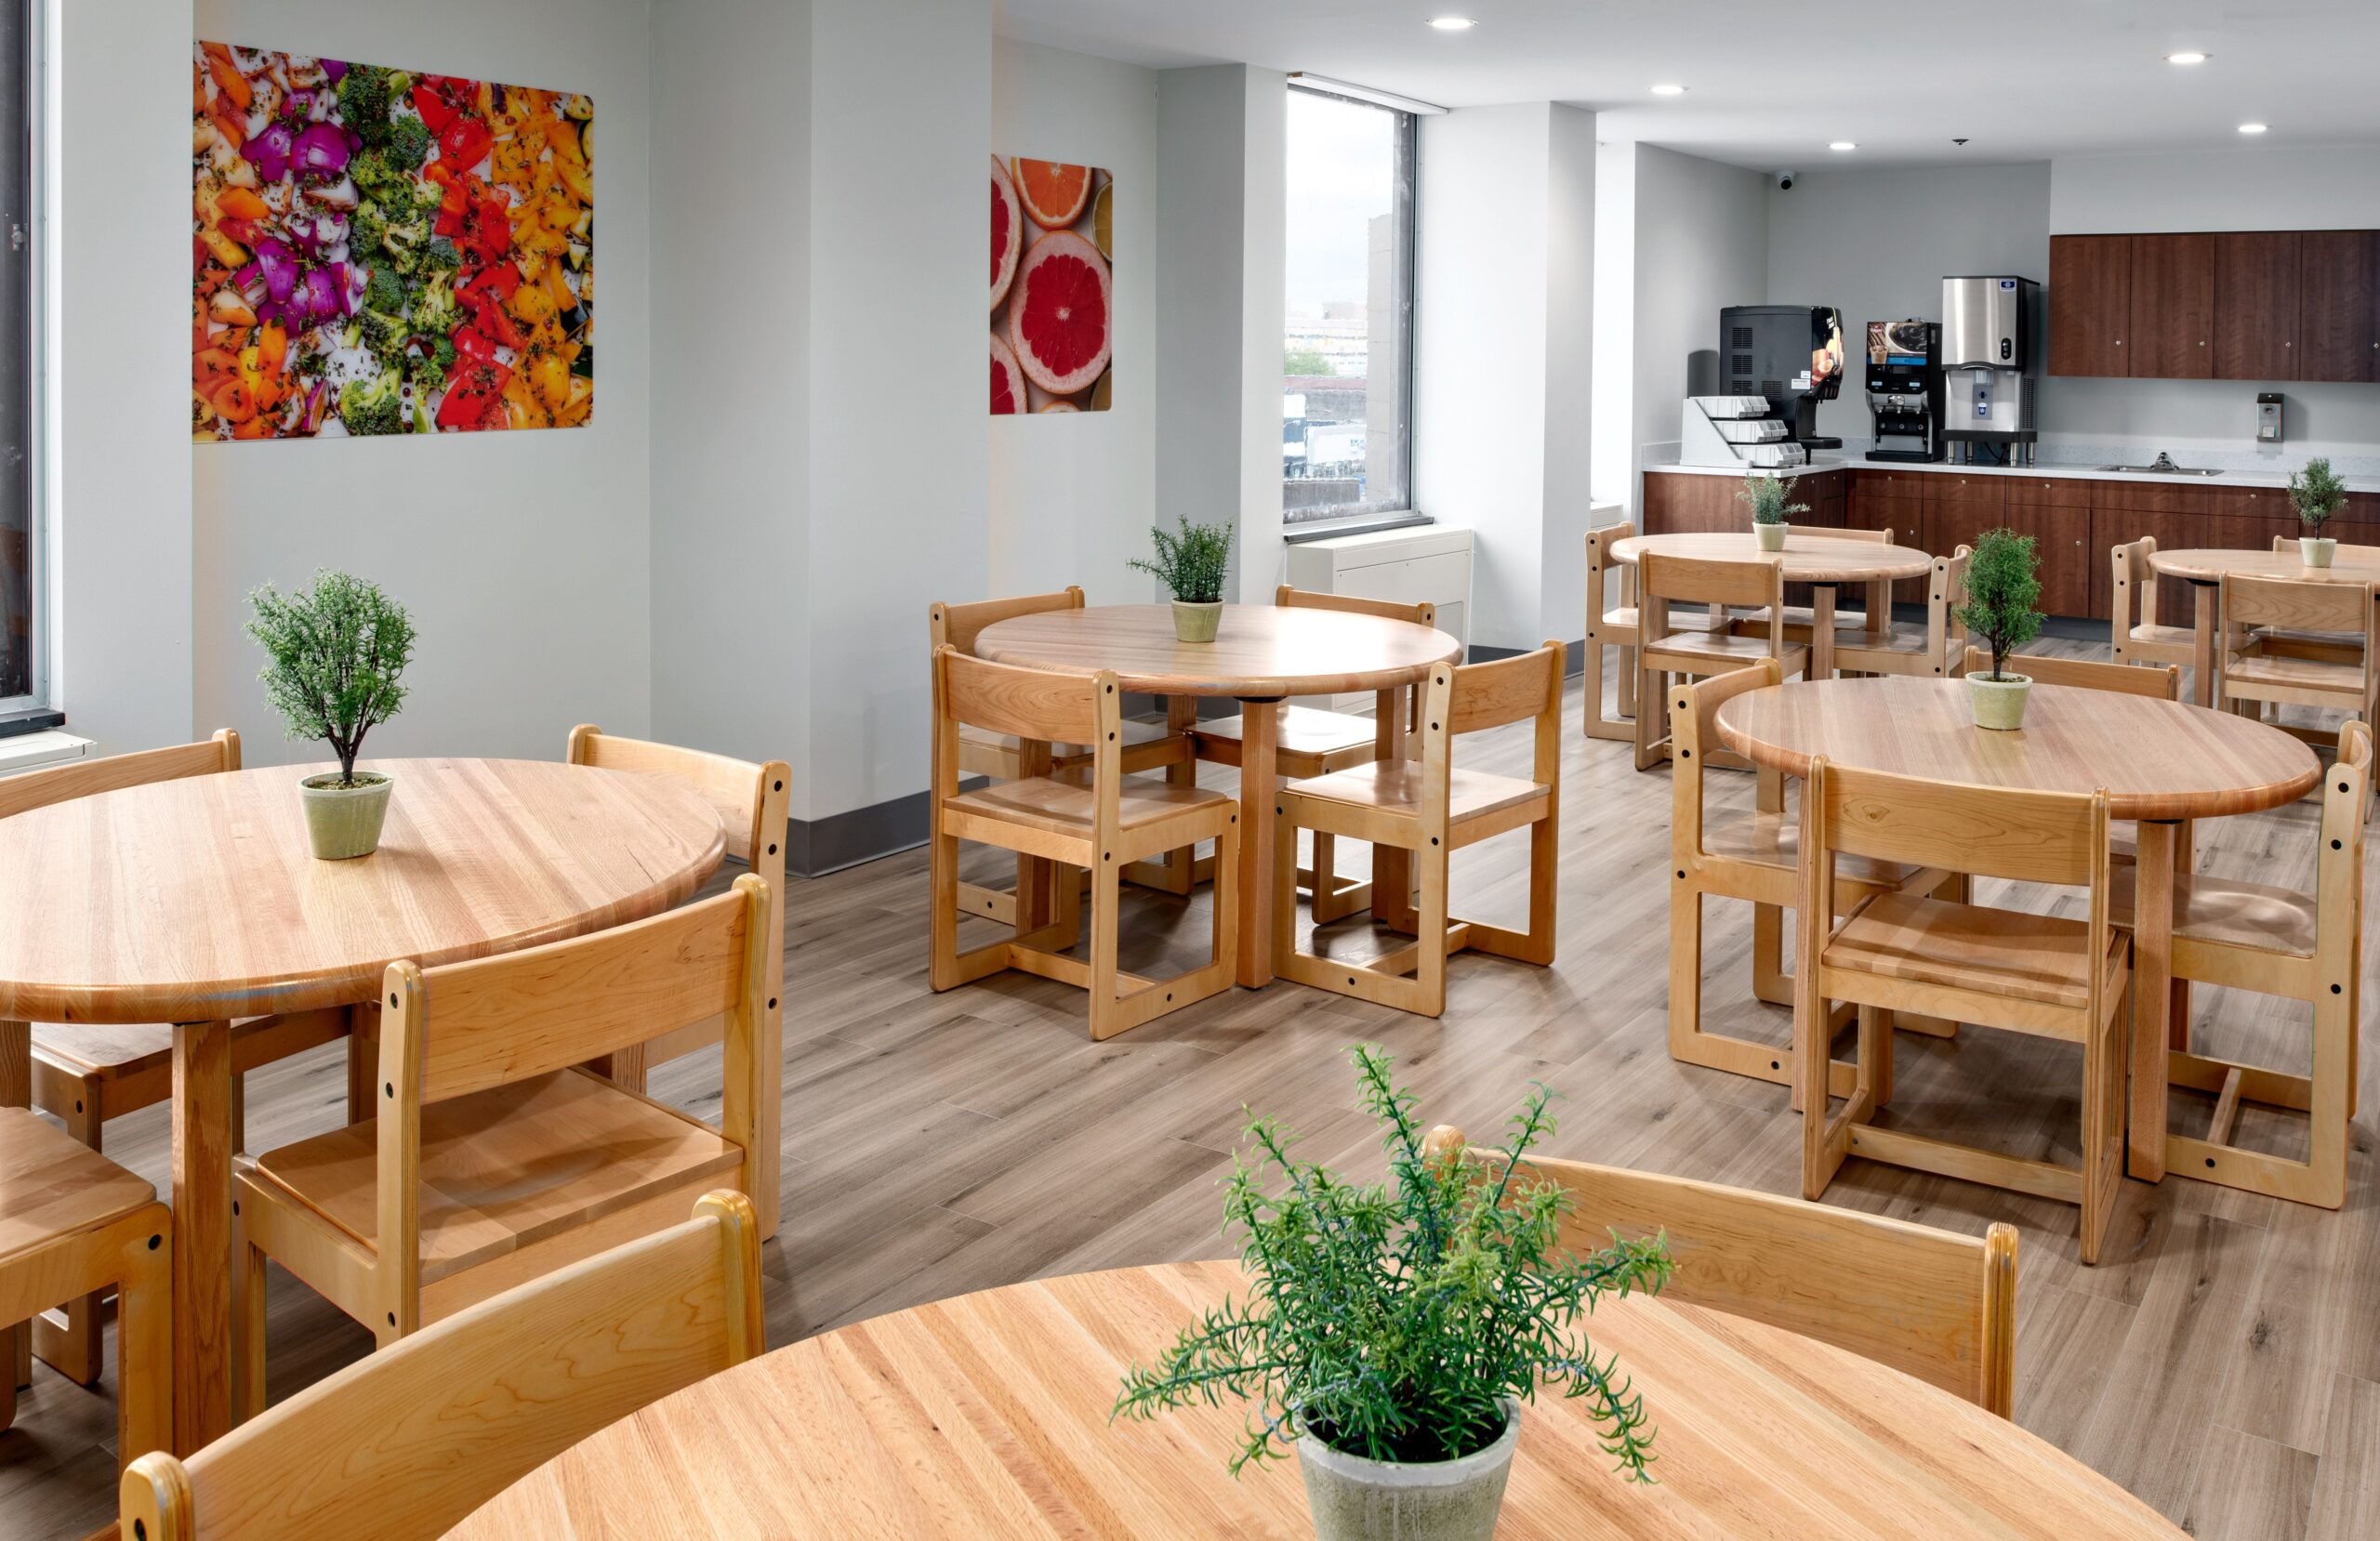 Picture showing Malvern Behavioral Clinic's cafeteria or a waiting room with chairs and tables, beautiful wall hanging, indoor plants on tables and a coffee/tea machine by the wall.